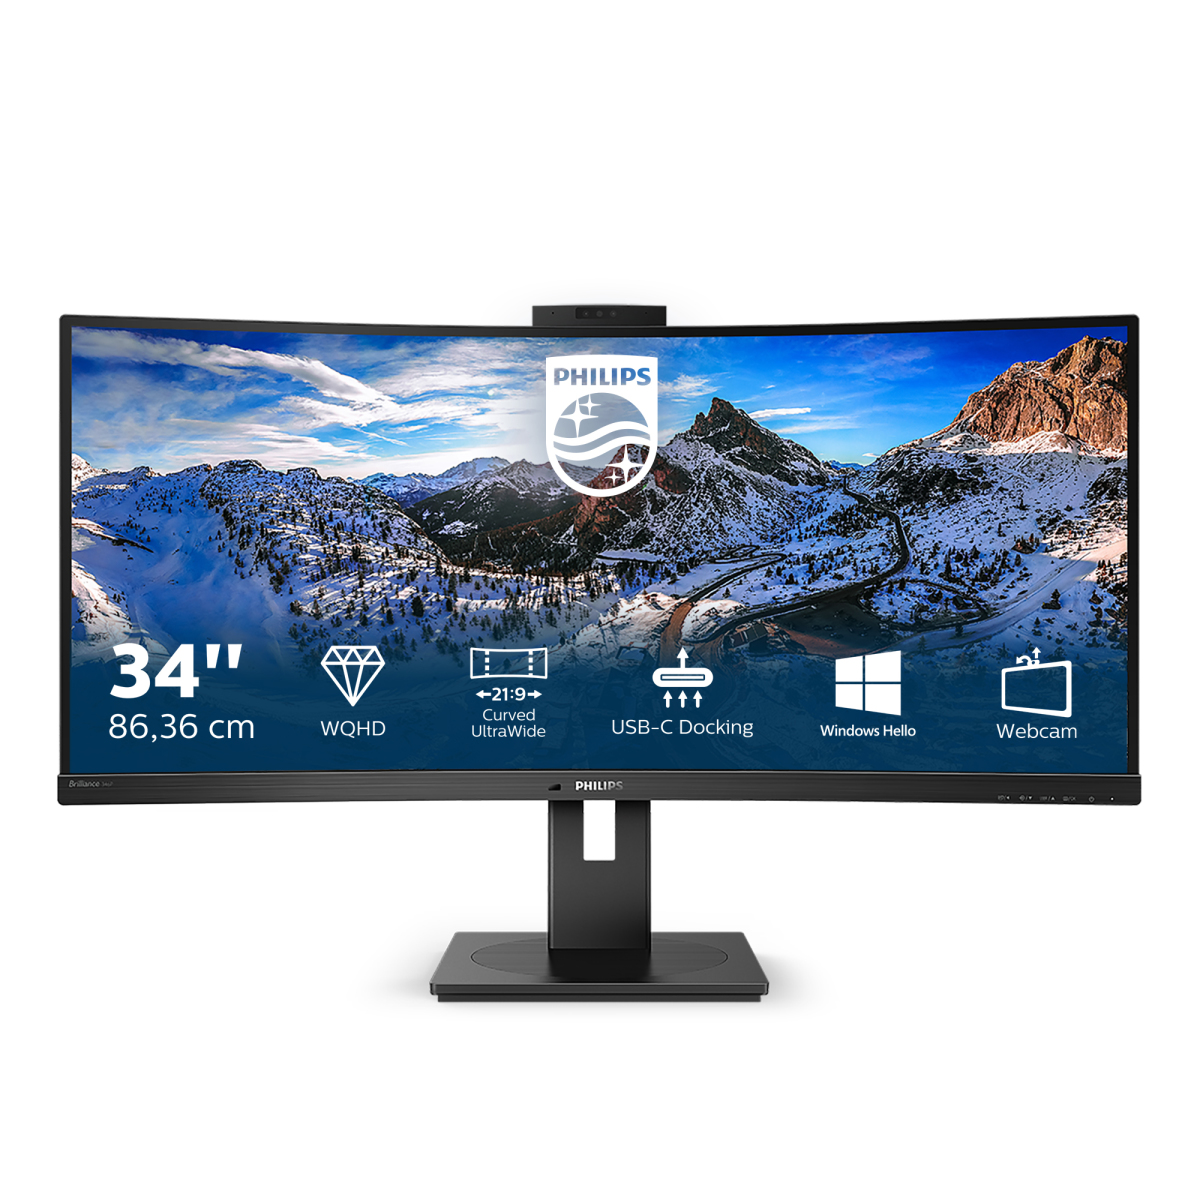 P Line Curved UltraWide LCD Monitor with USB-C